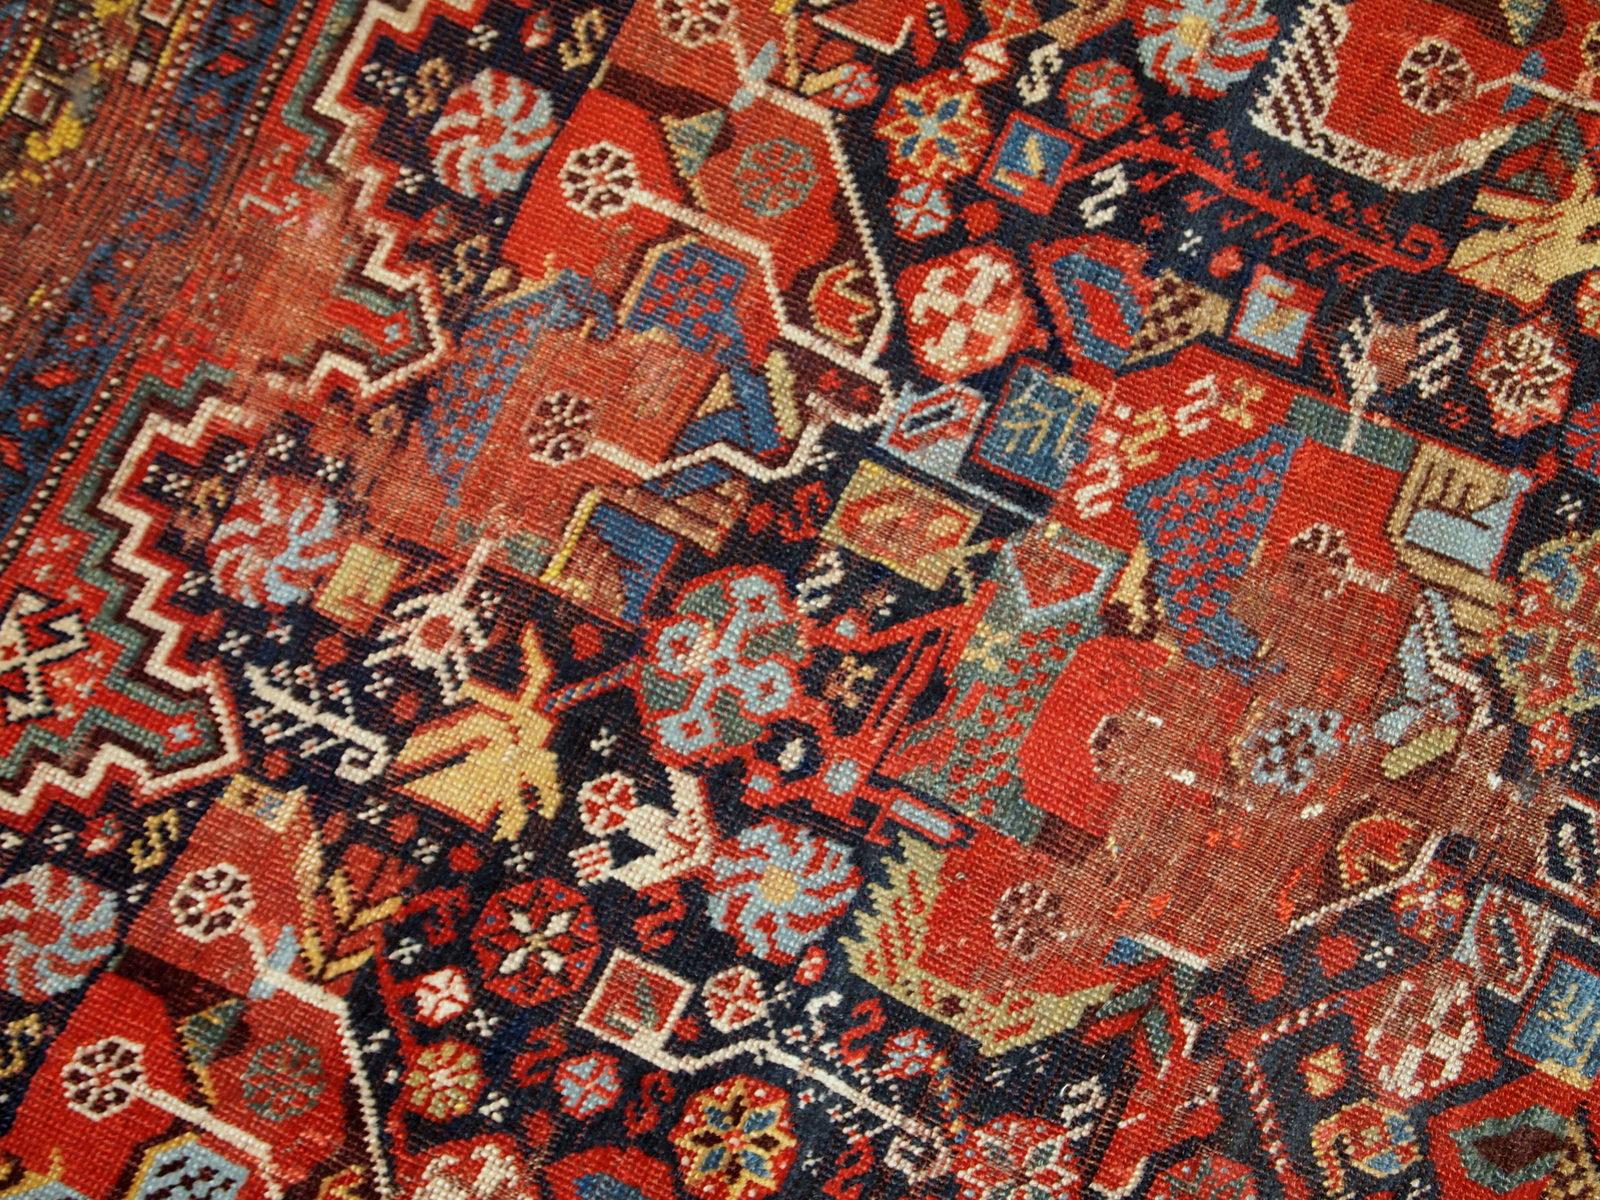 Antique handmade collectible Khamseh rug from the mid-18th century. It is in bright natural colors and in distressed condition.

Condition: Original, distressed,

circa 1840s,

Size: 4.9' x 6.4' (149cm x 195cm),

Material: Wool,

Country